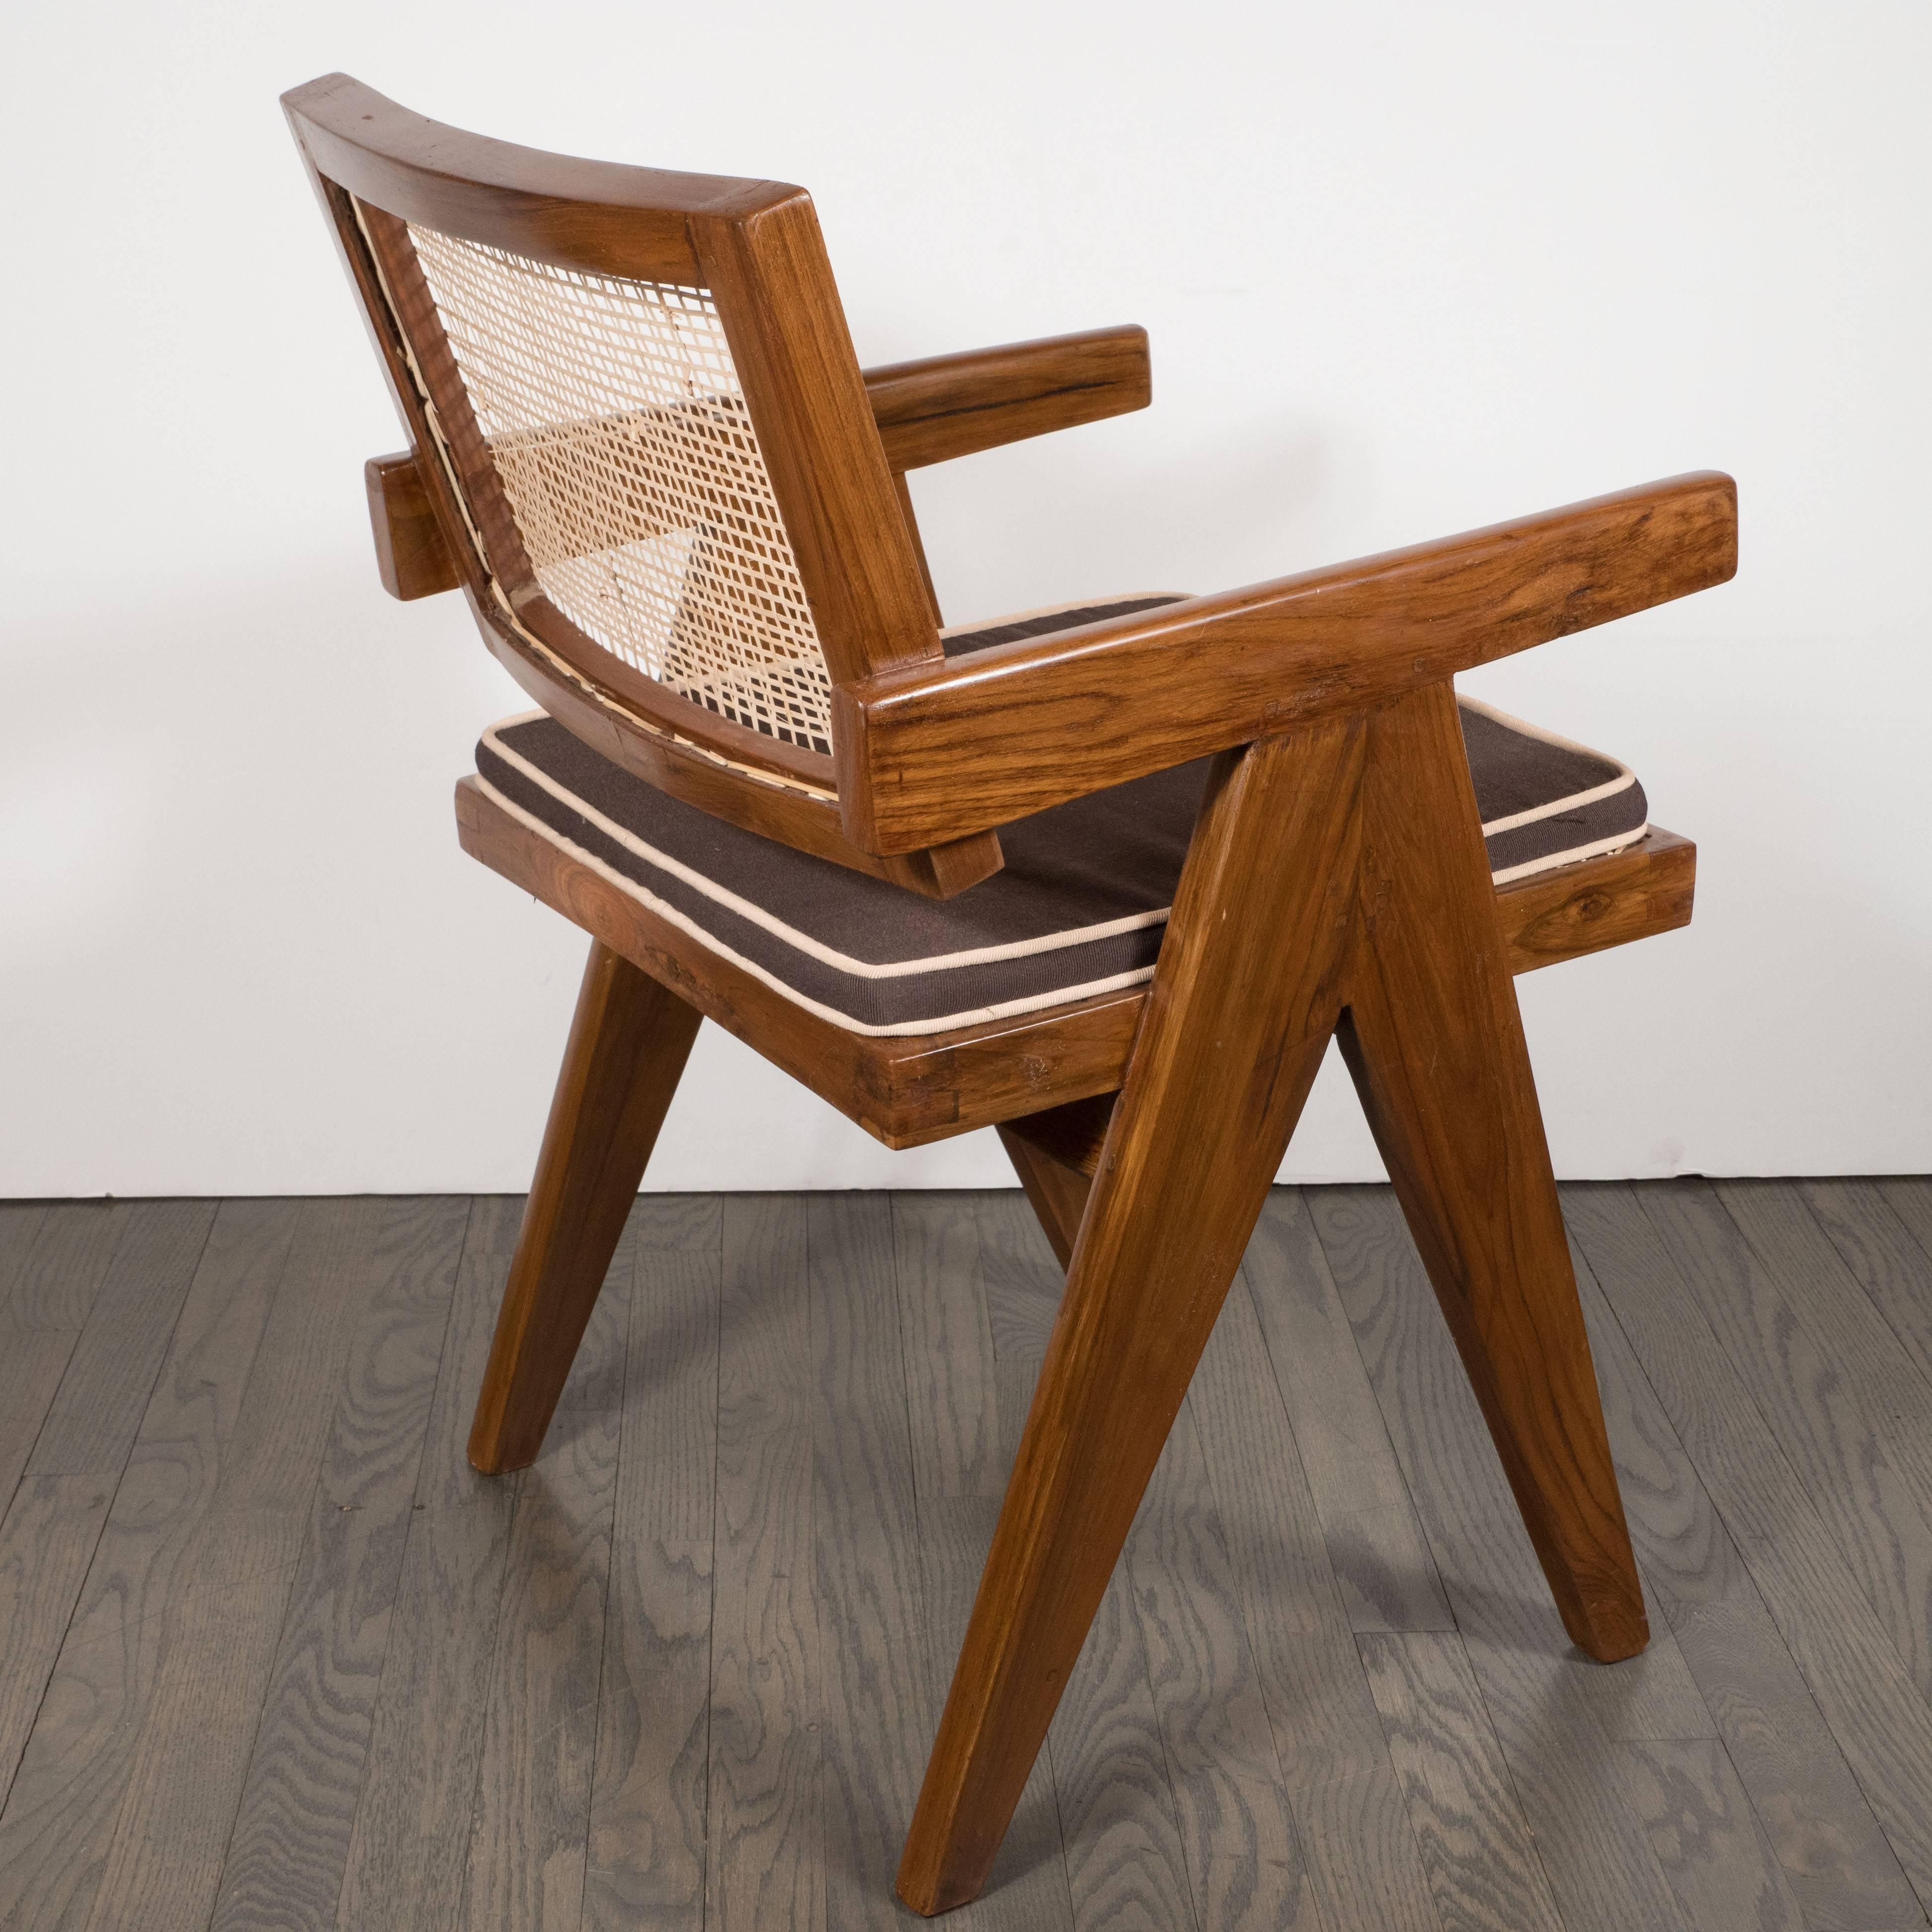 Pair of Armchairs in Teak, Caning and Upholstery by Pierre Jeanneret 1